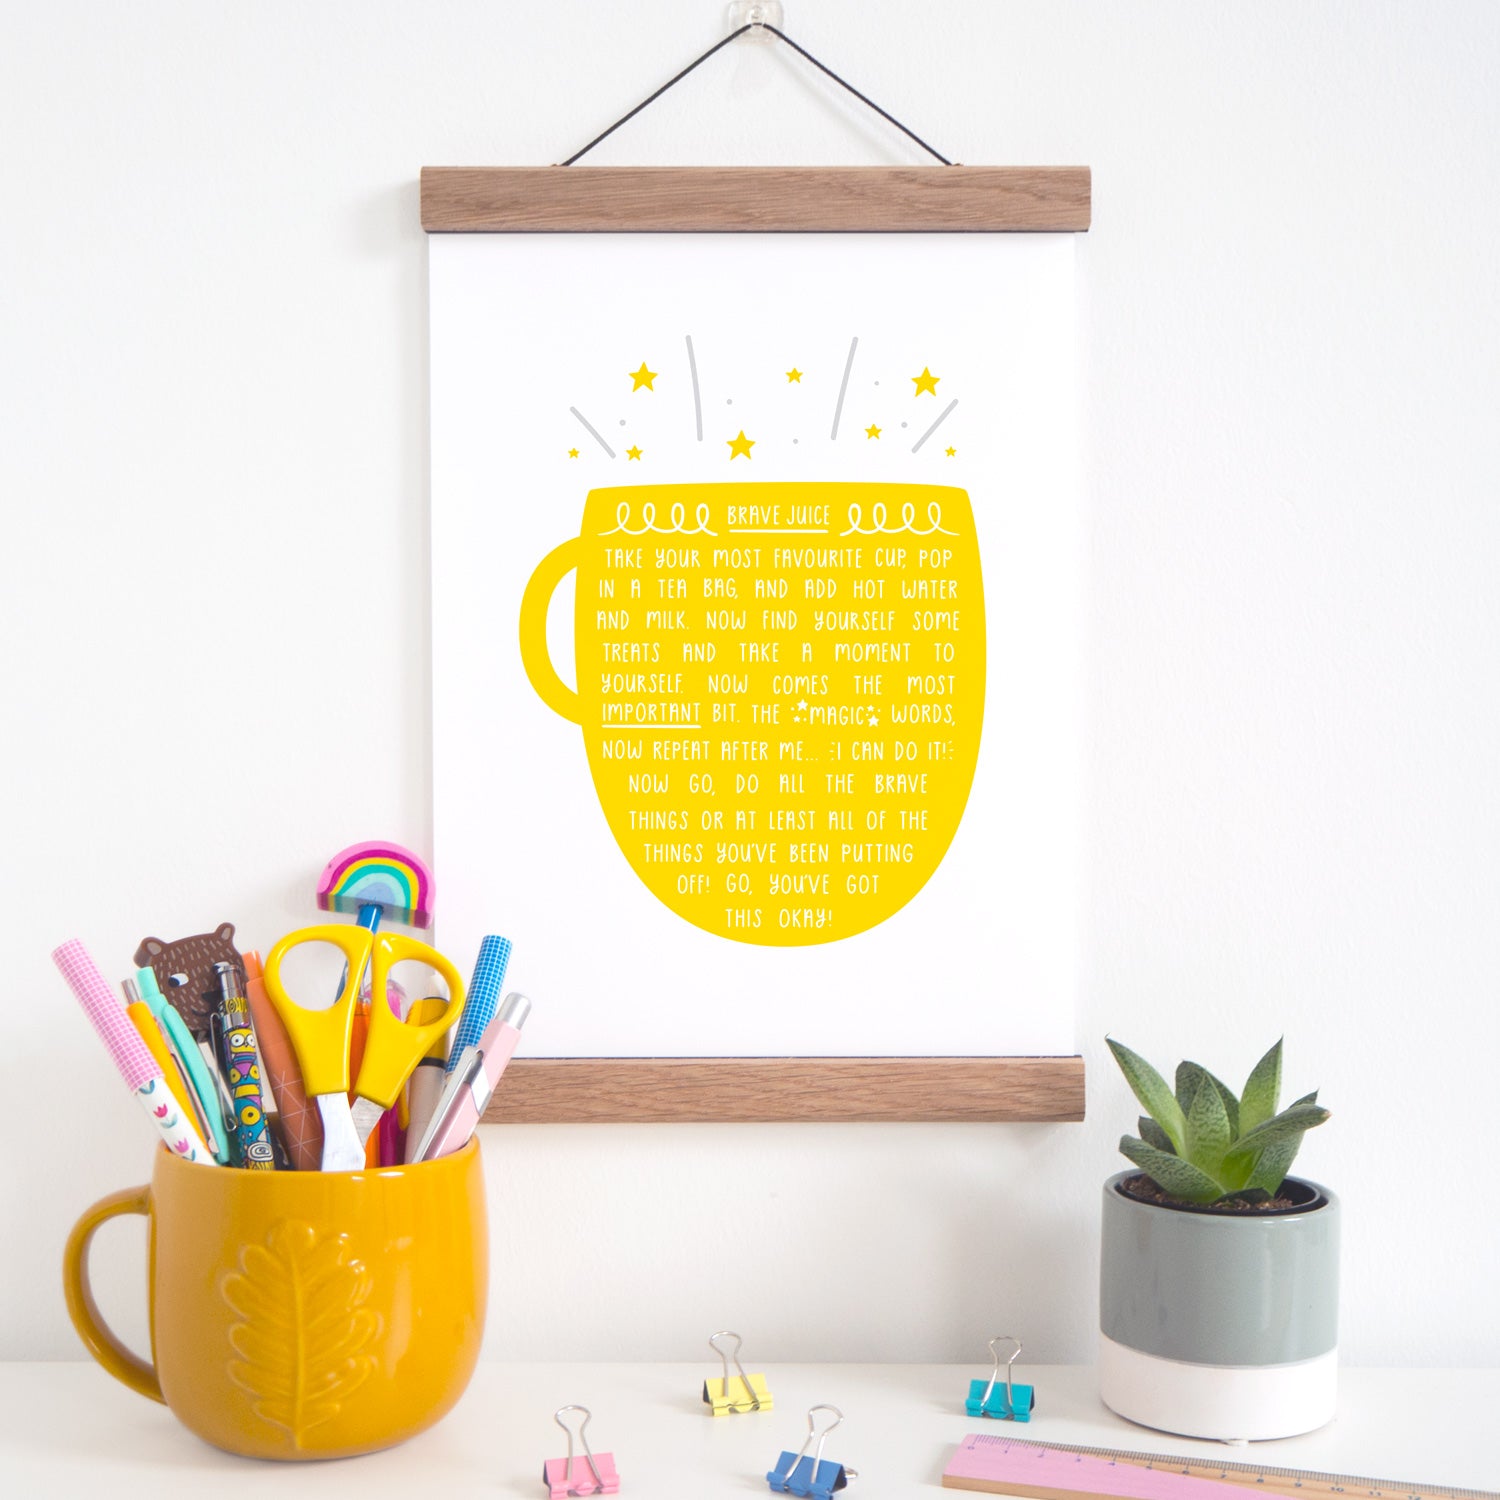 Brave juice print featuring a yellow cup of tea, which is hung on a solid oak magnetic frame.